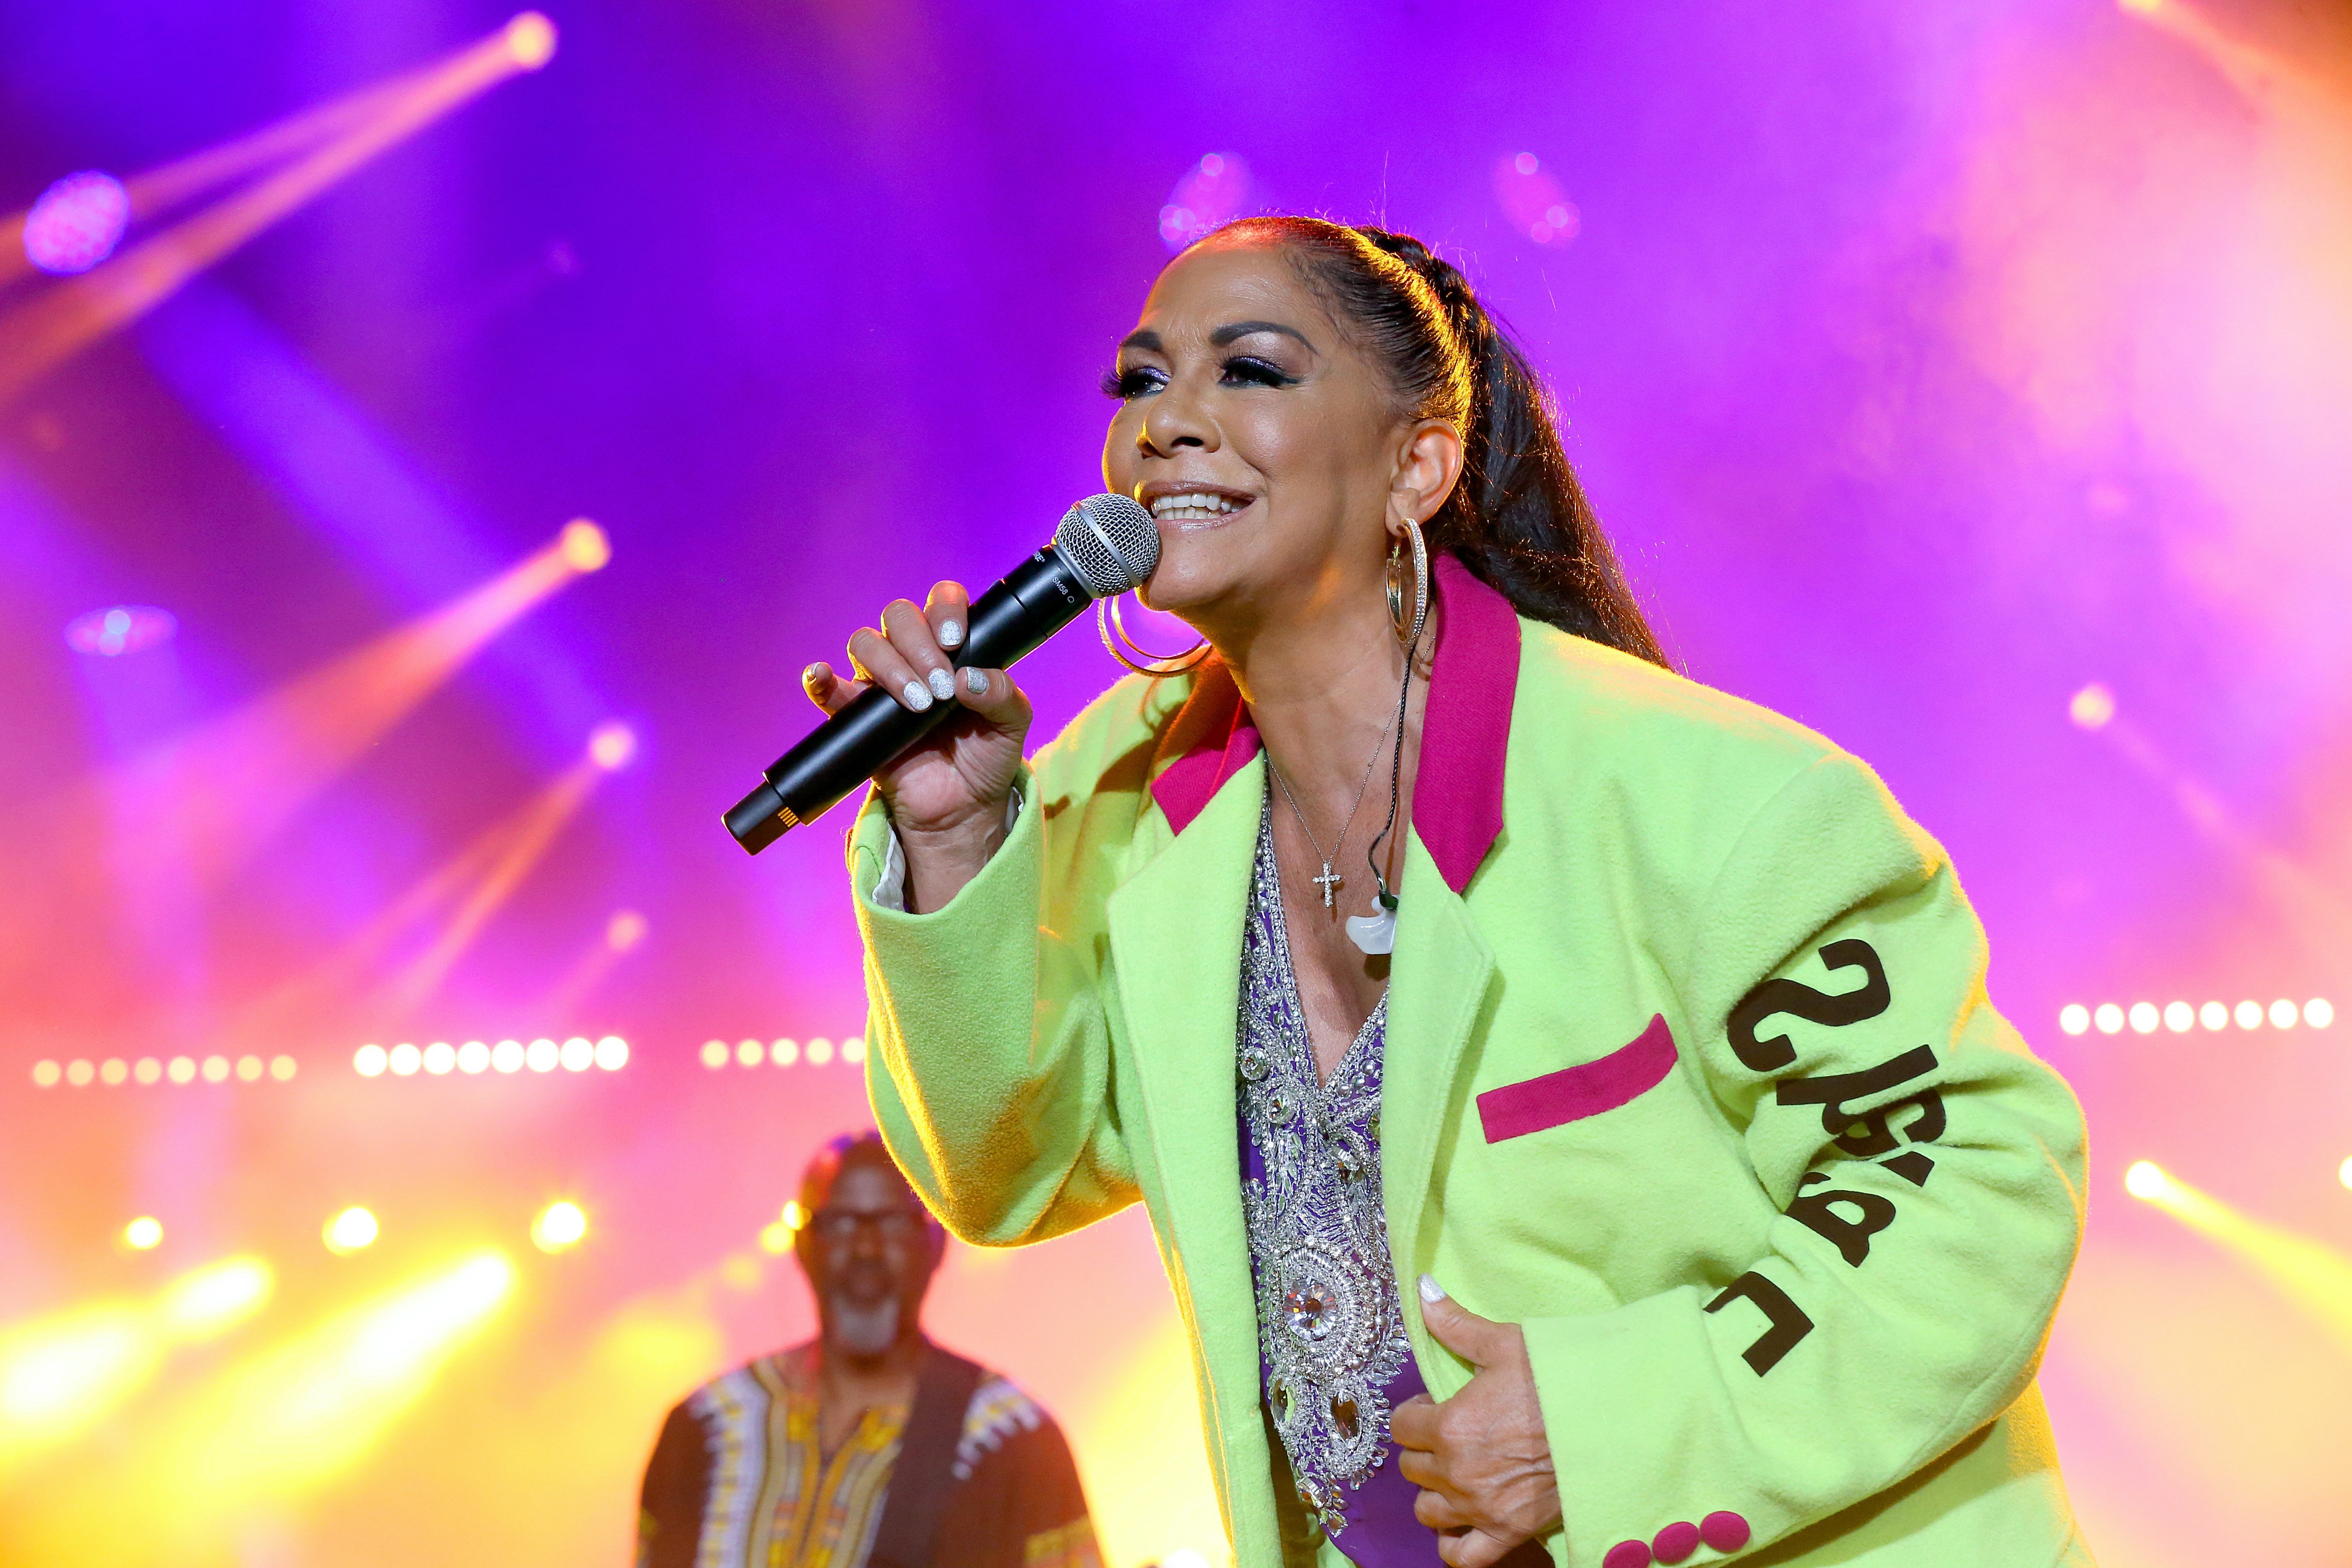 Sheila E during ESSENCE Festival on July 05, 2019 in New Orleans, Louisiana | Photo: Getty Images